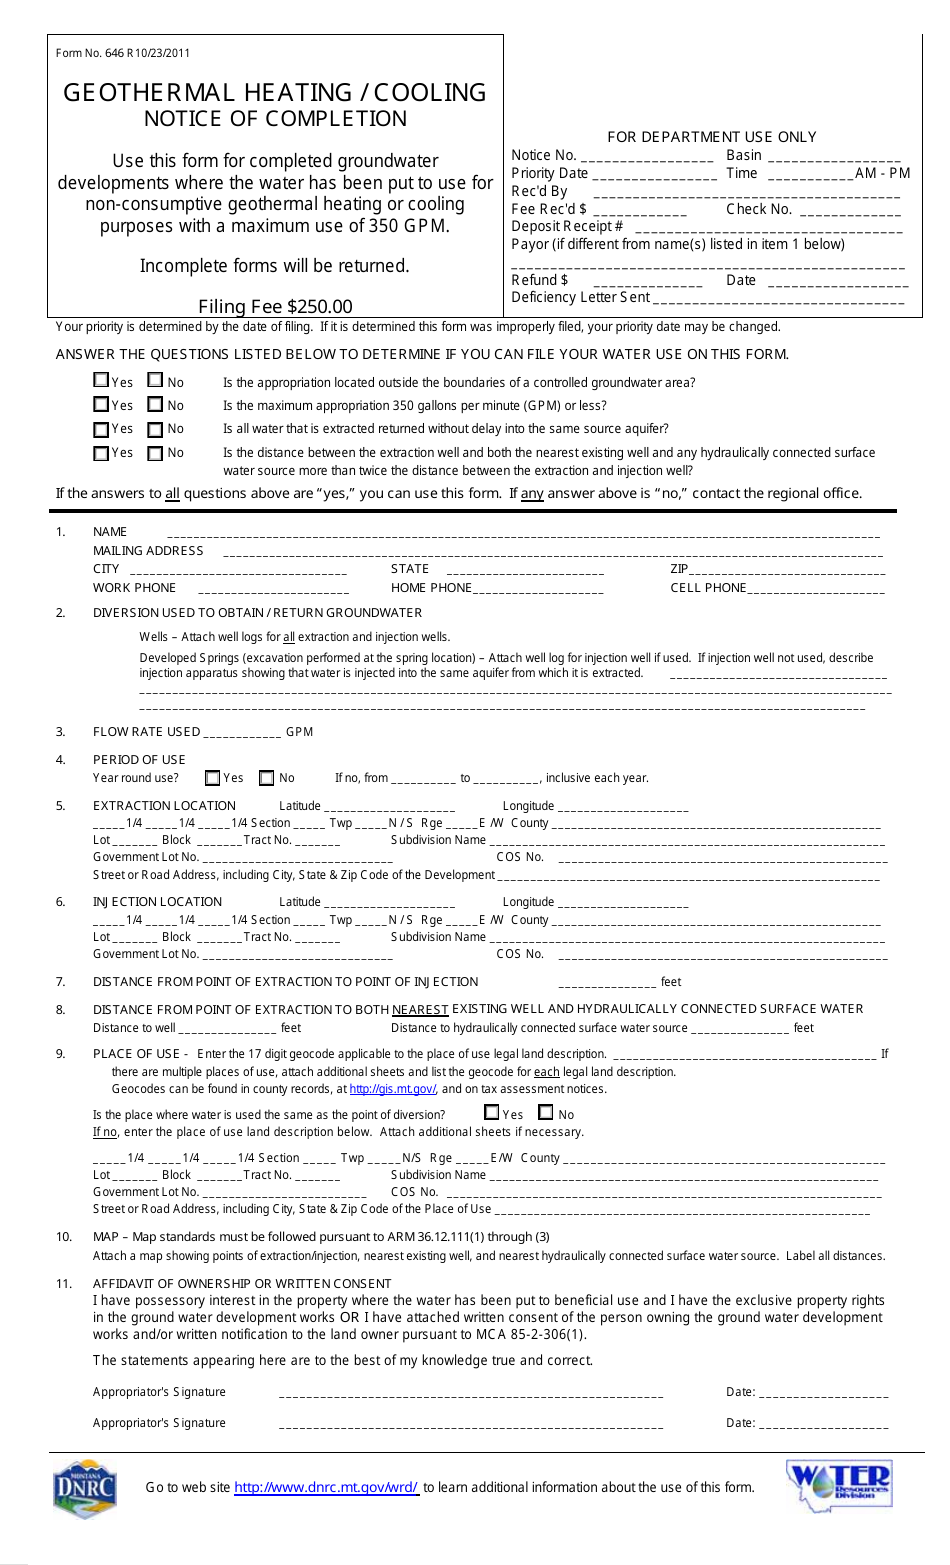 Form 646 Geothermal Heating / Cooling Notice of Completion - Montana, Page 1